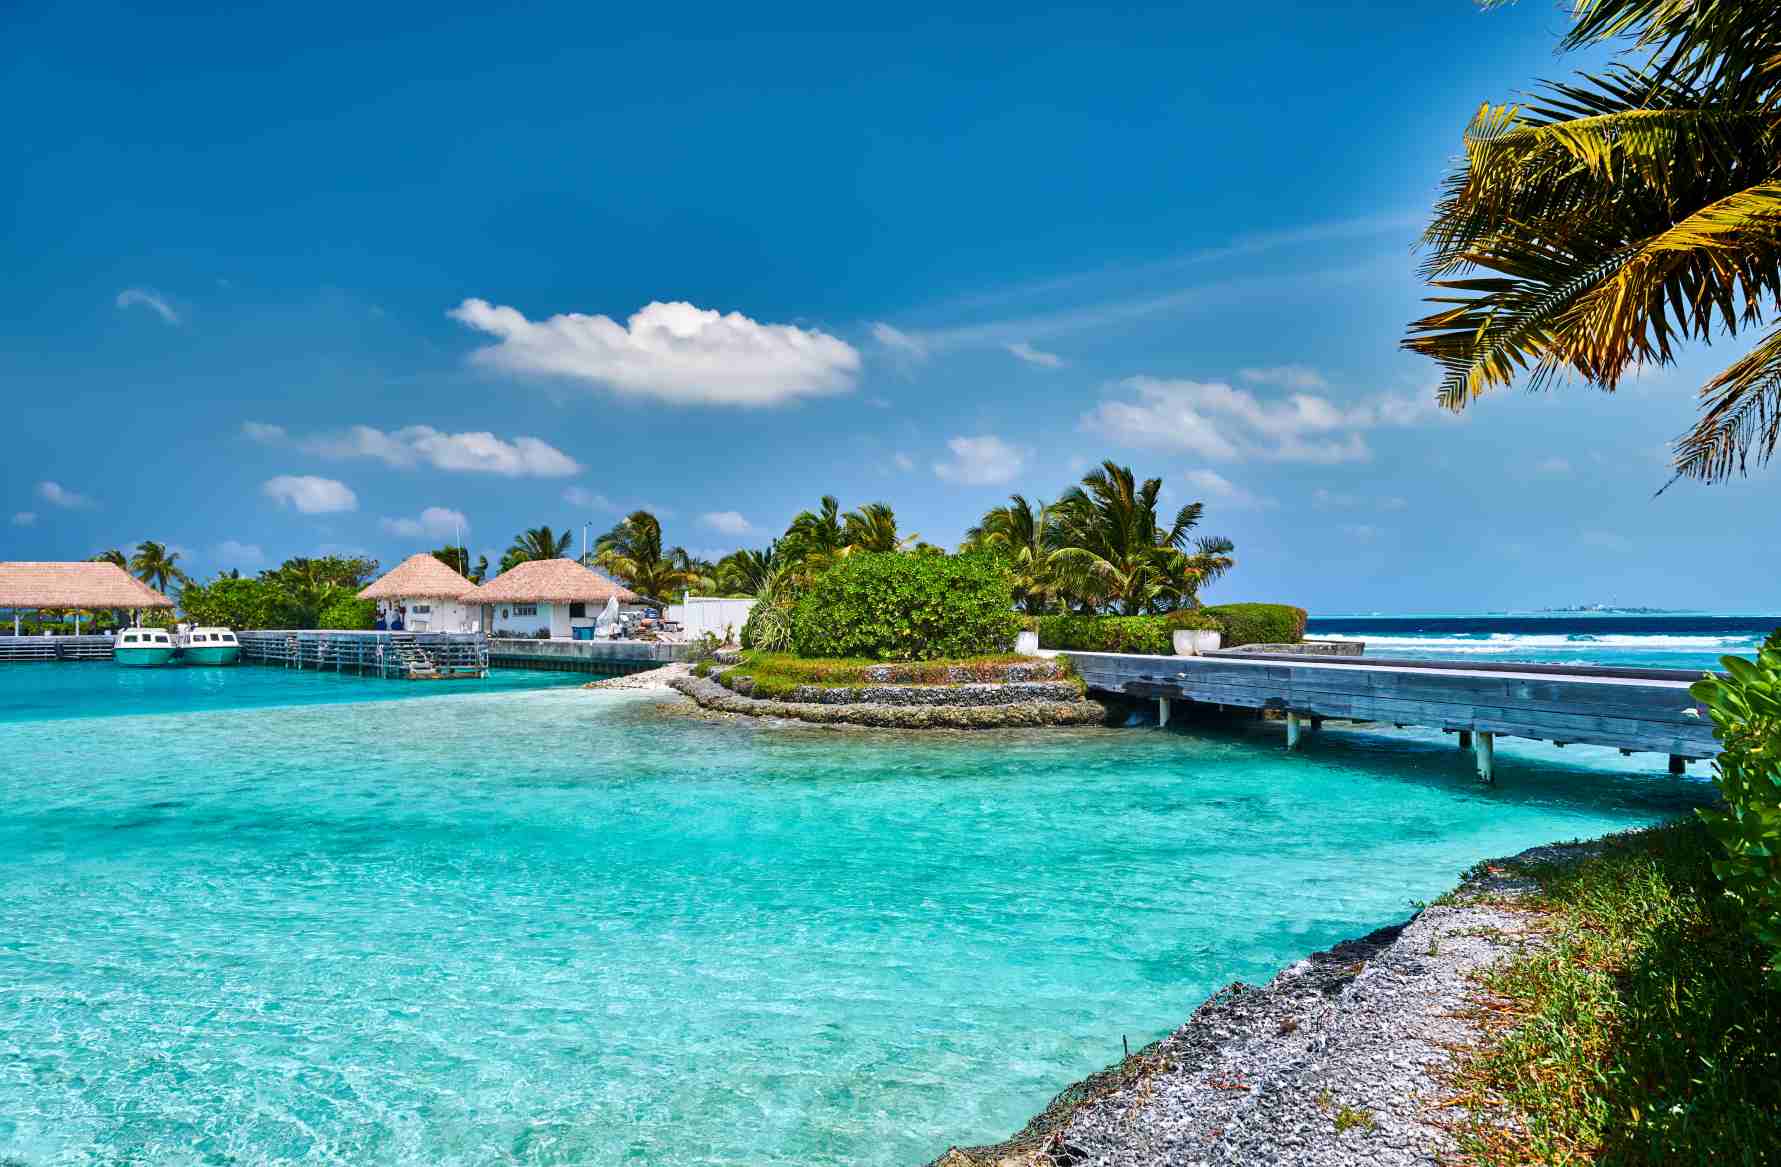 Visit these Top 8 Tropical Destinations to Escape the Winter Chill